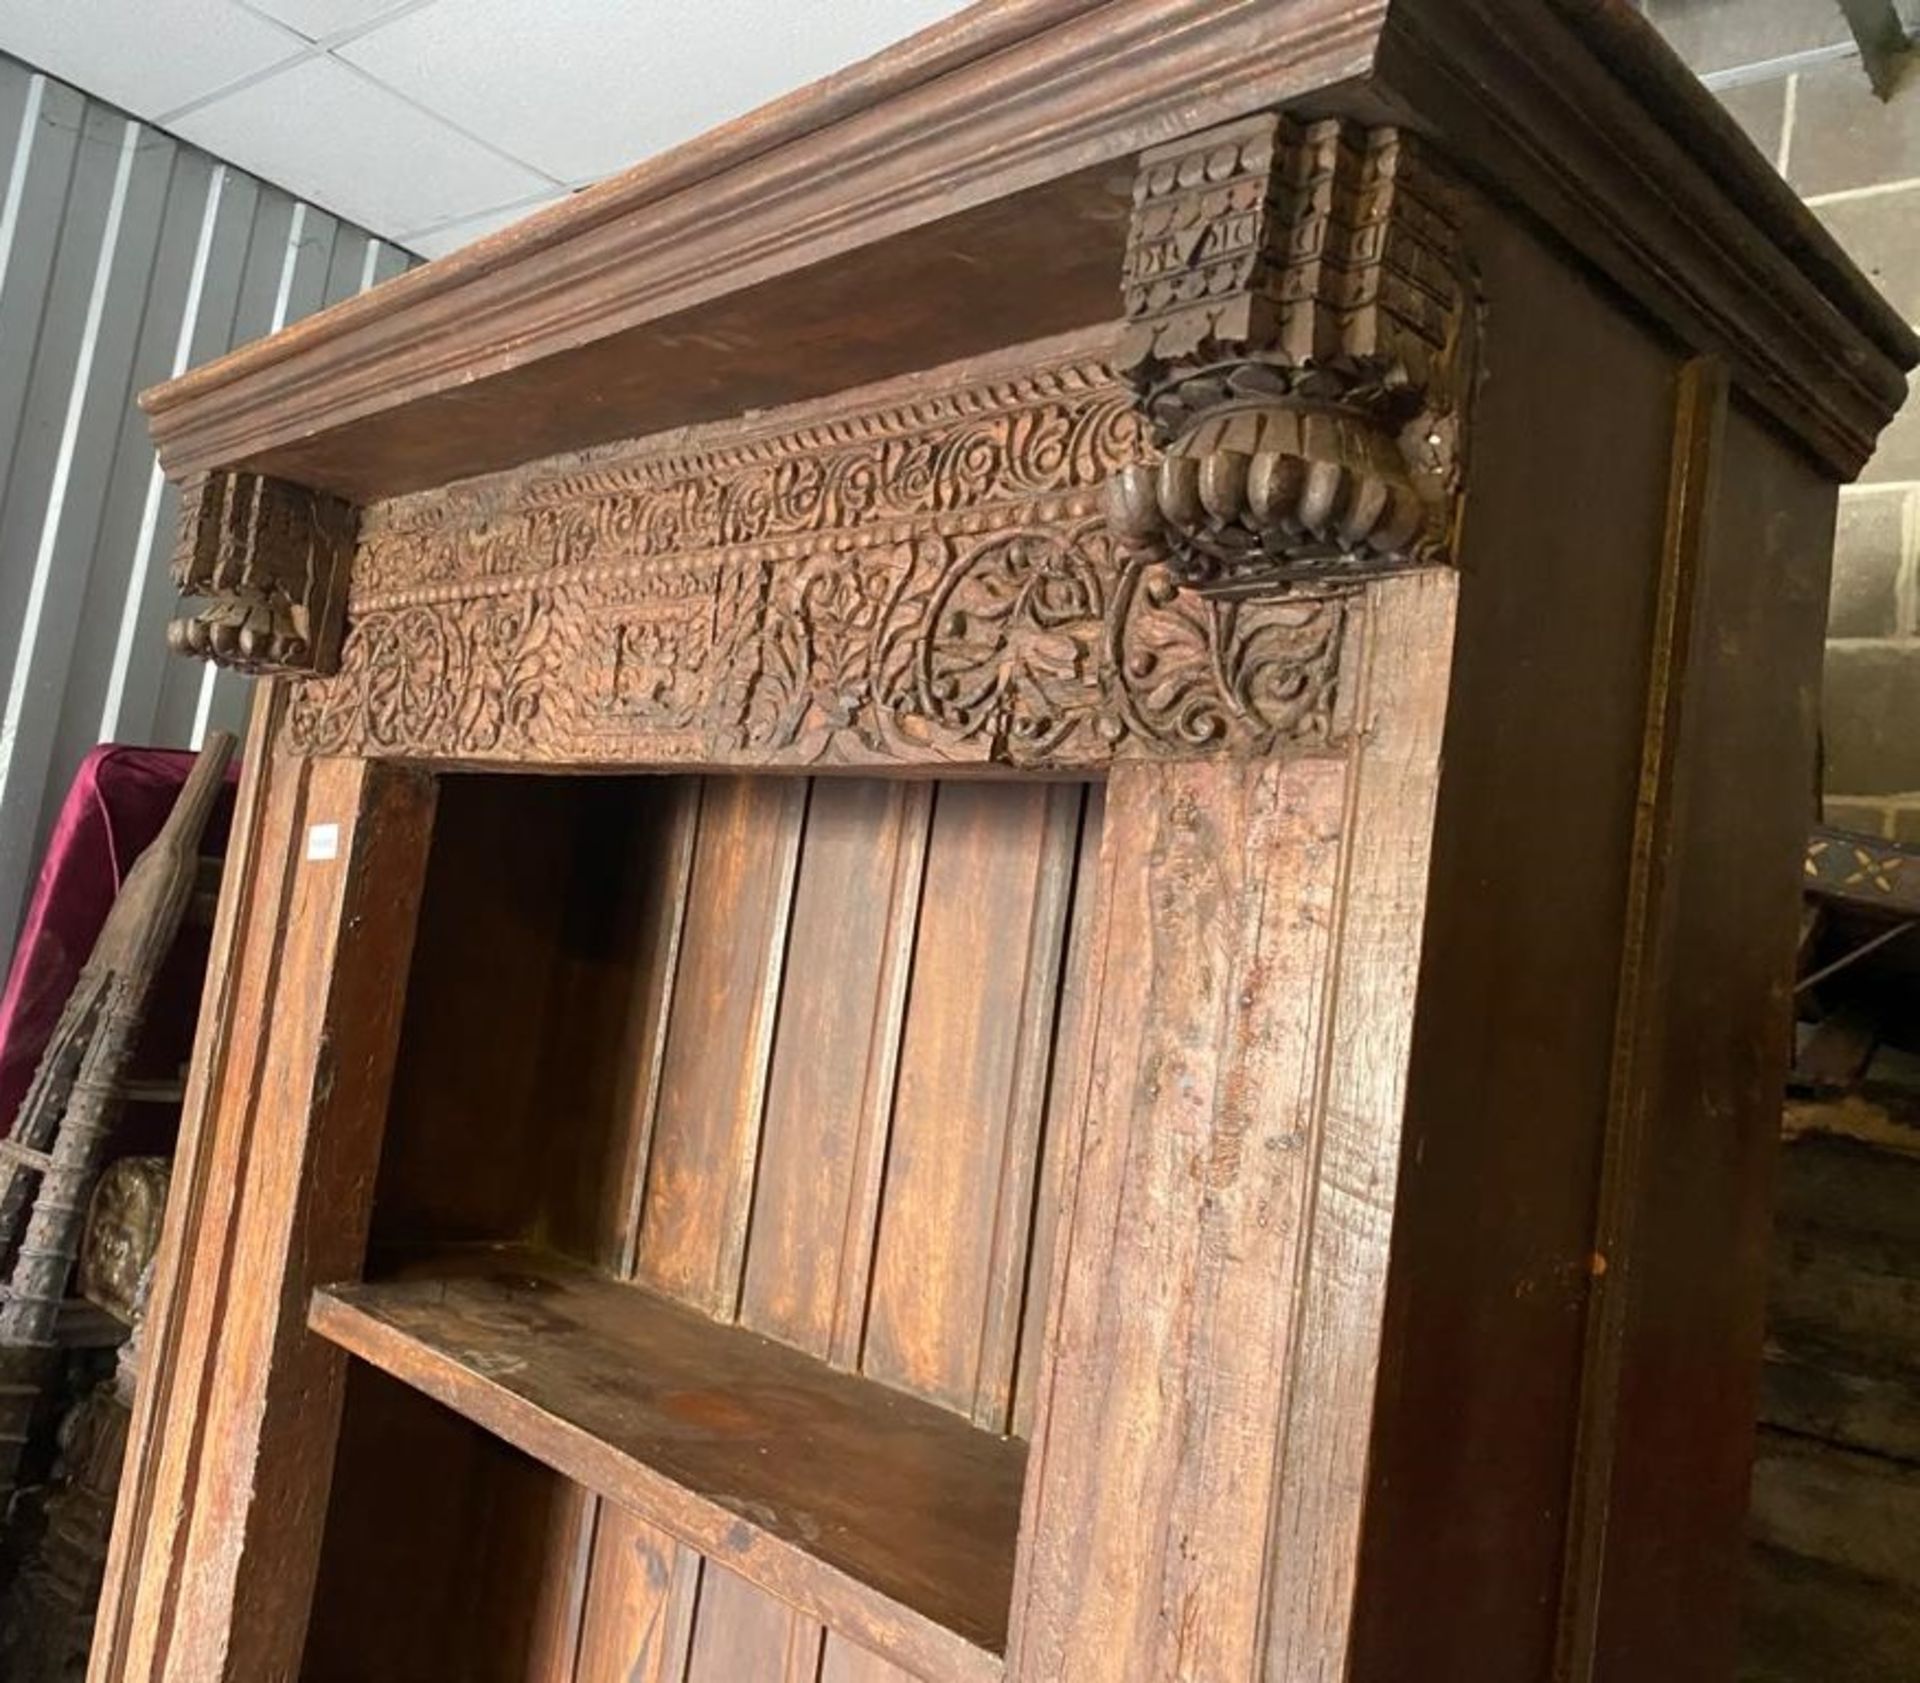 1 x Rustic Oak Bookcase With Carved Wood Detail - Dimensions (mm): 1200x400x2250 - Image 8 of 10